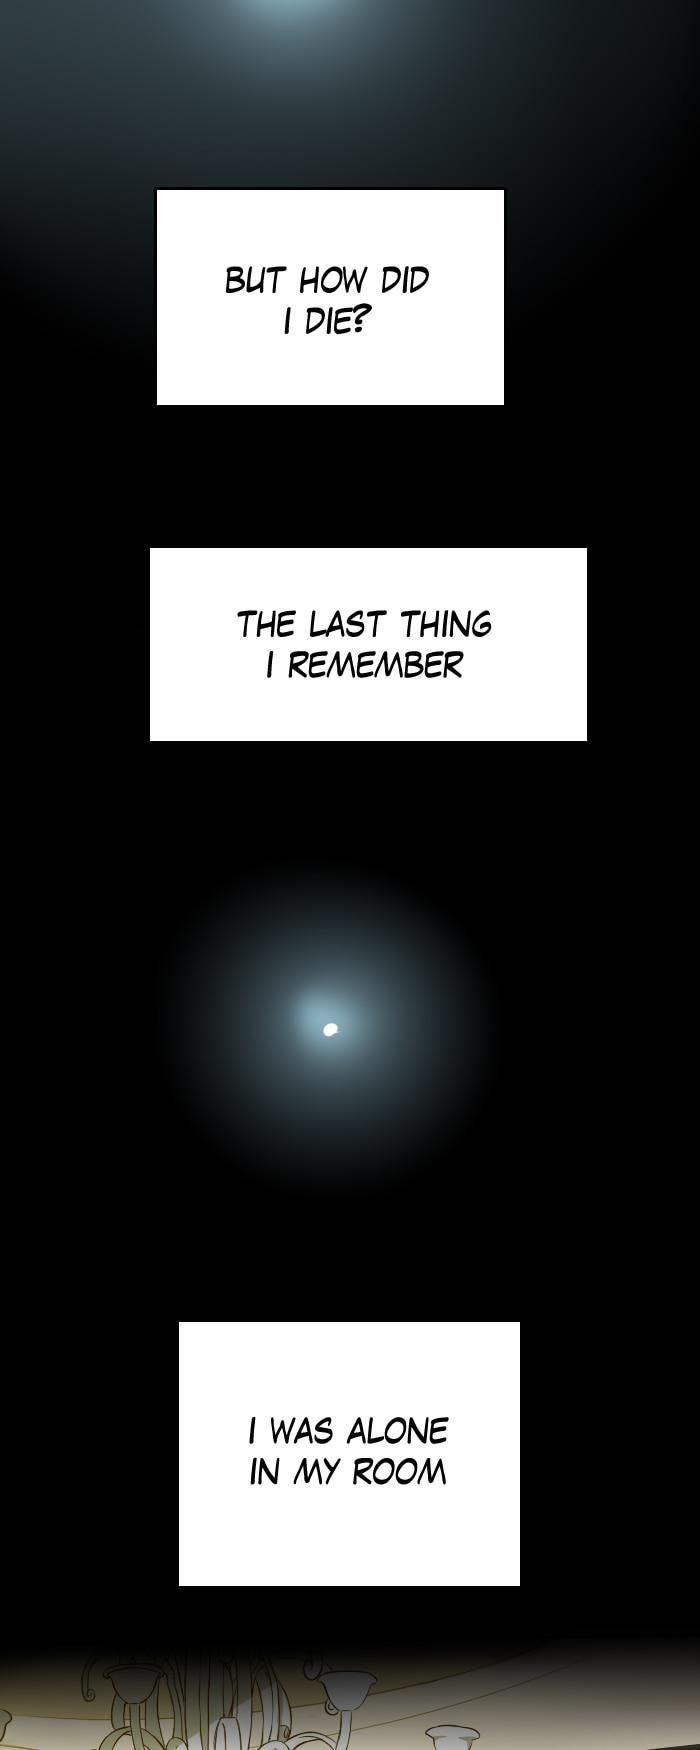 The Beginning After The End, Episode 1 image 03